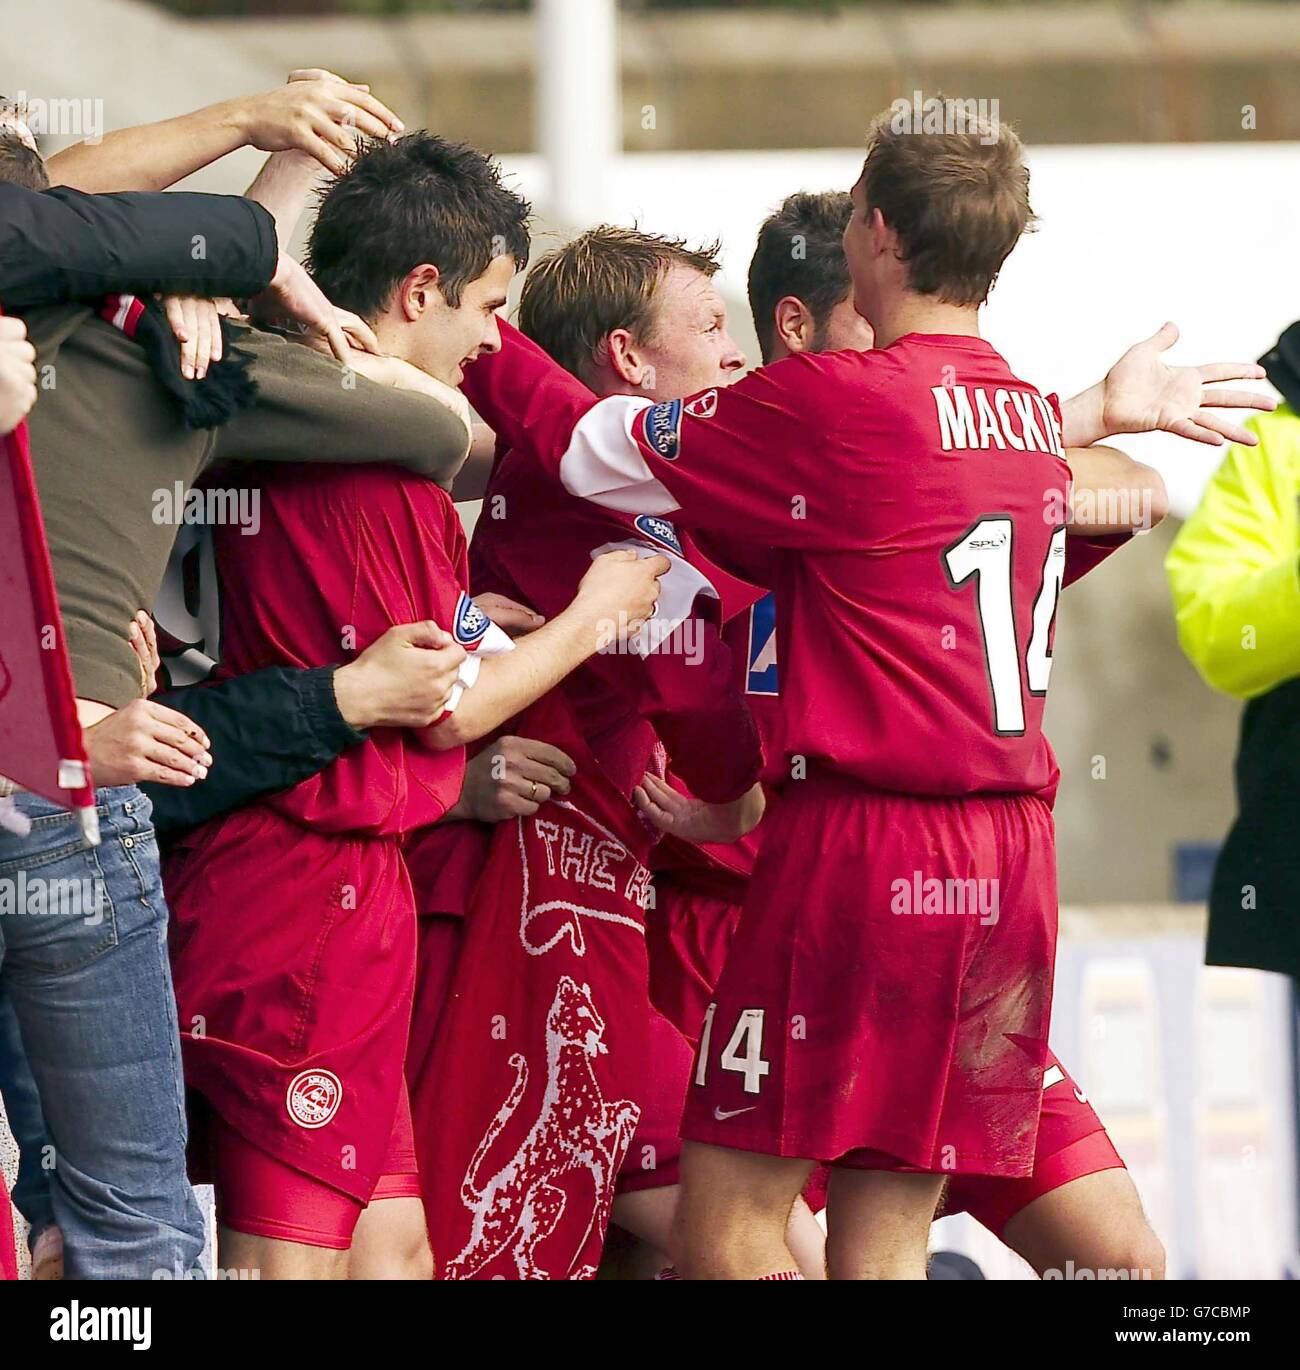 Aberdeen players celebrate following an own goal scored by Kilmarnock's James Fowler (not pictured) during the Bank of Scotland Premier League match at Rugby Park, Kilmarnock, Saturday September 18, 2004. EDITORIAL USE ONLY. Stock Photo